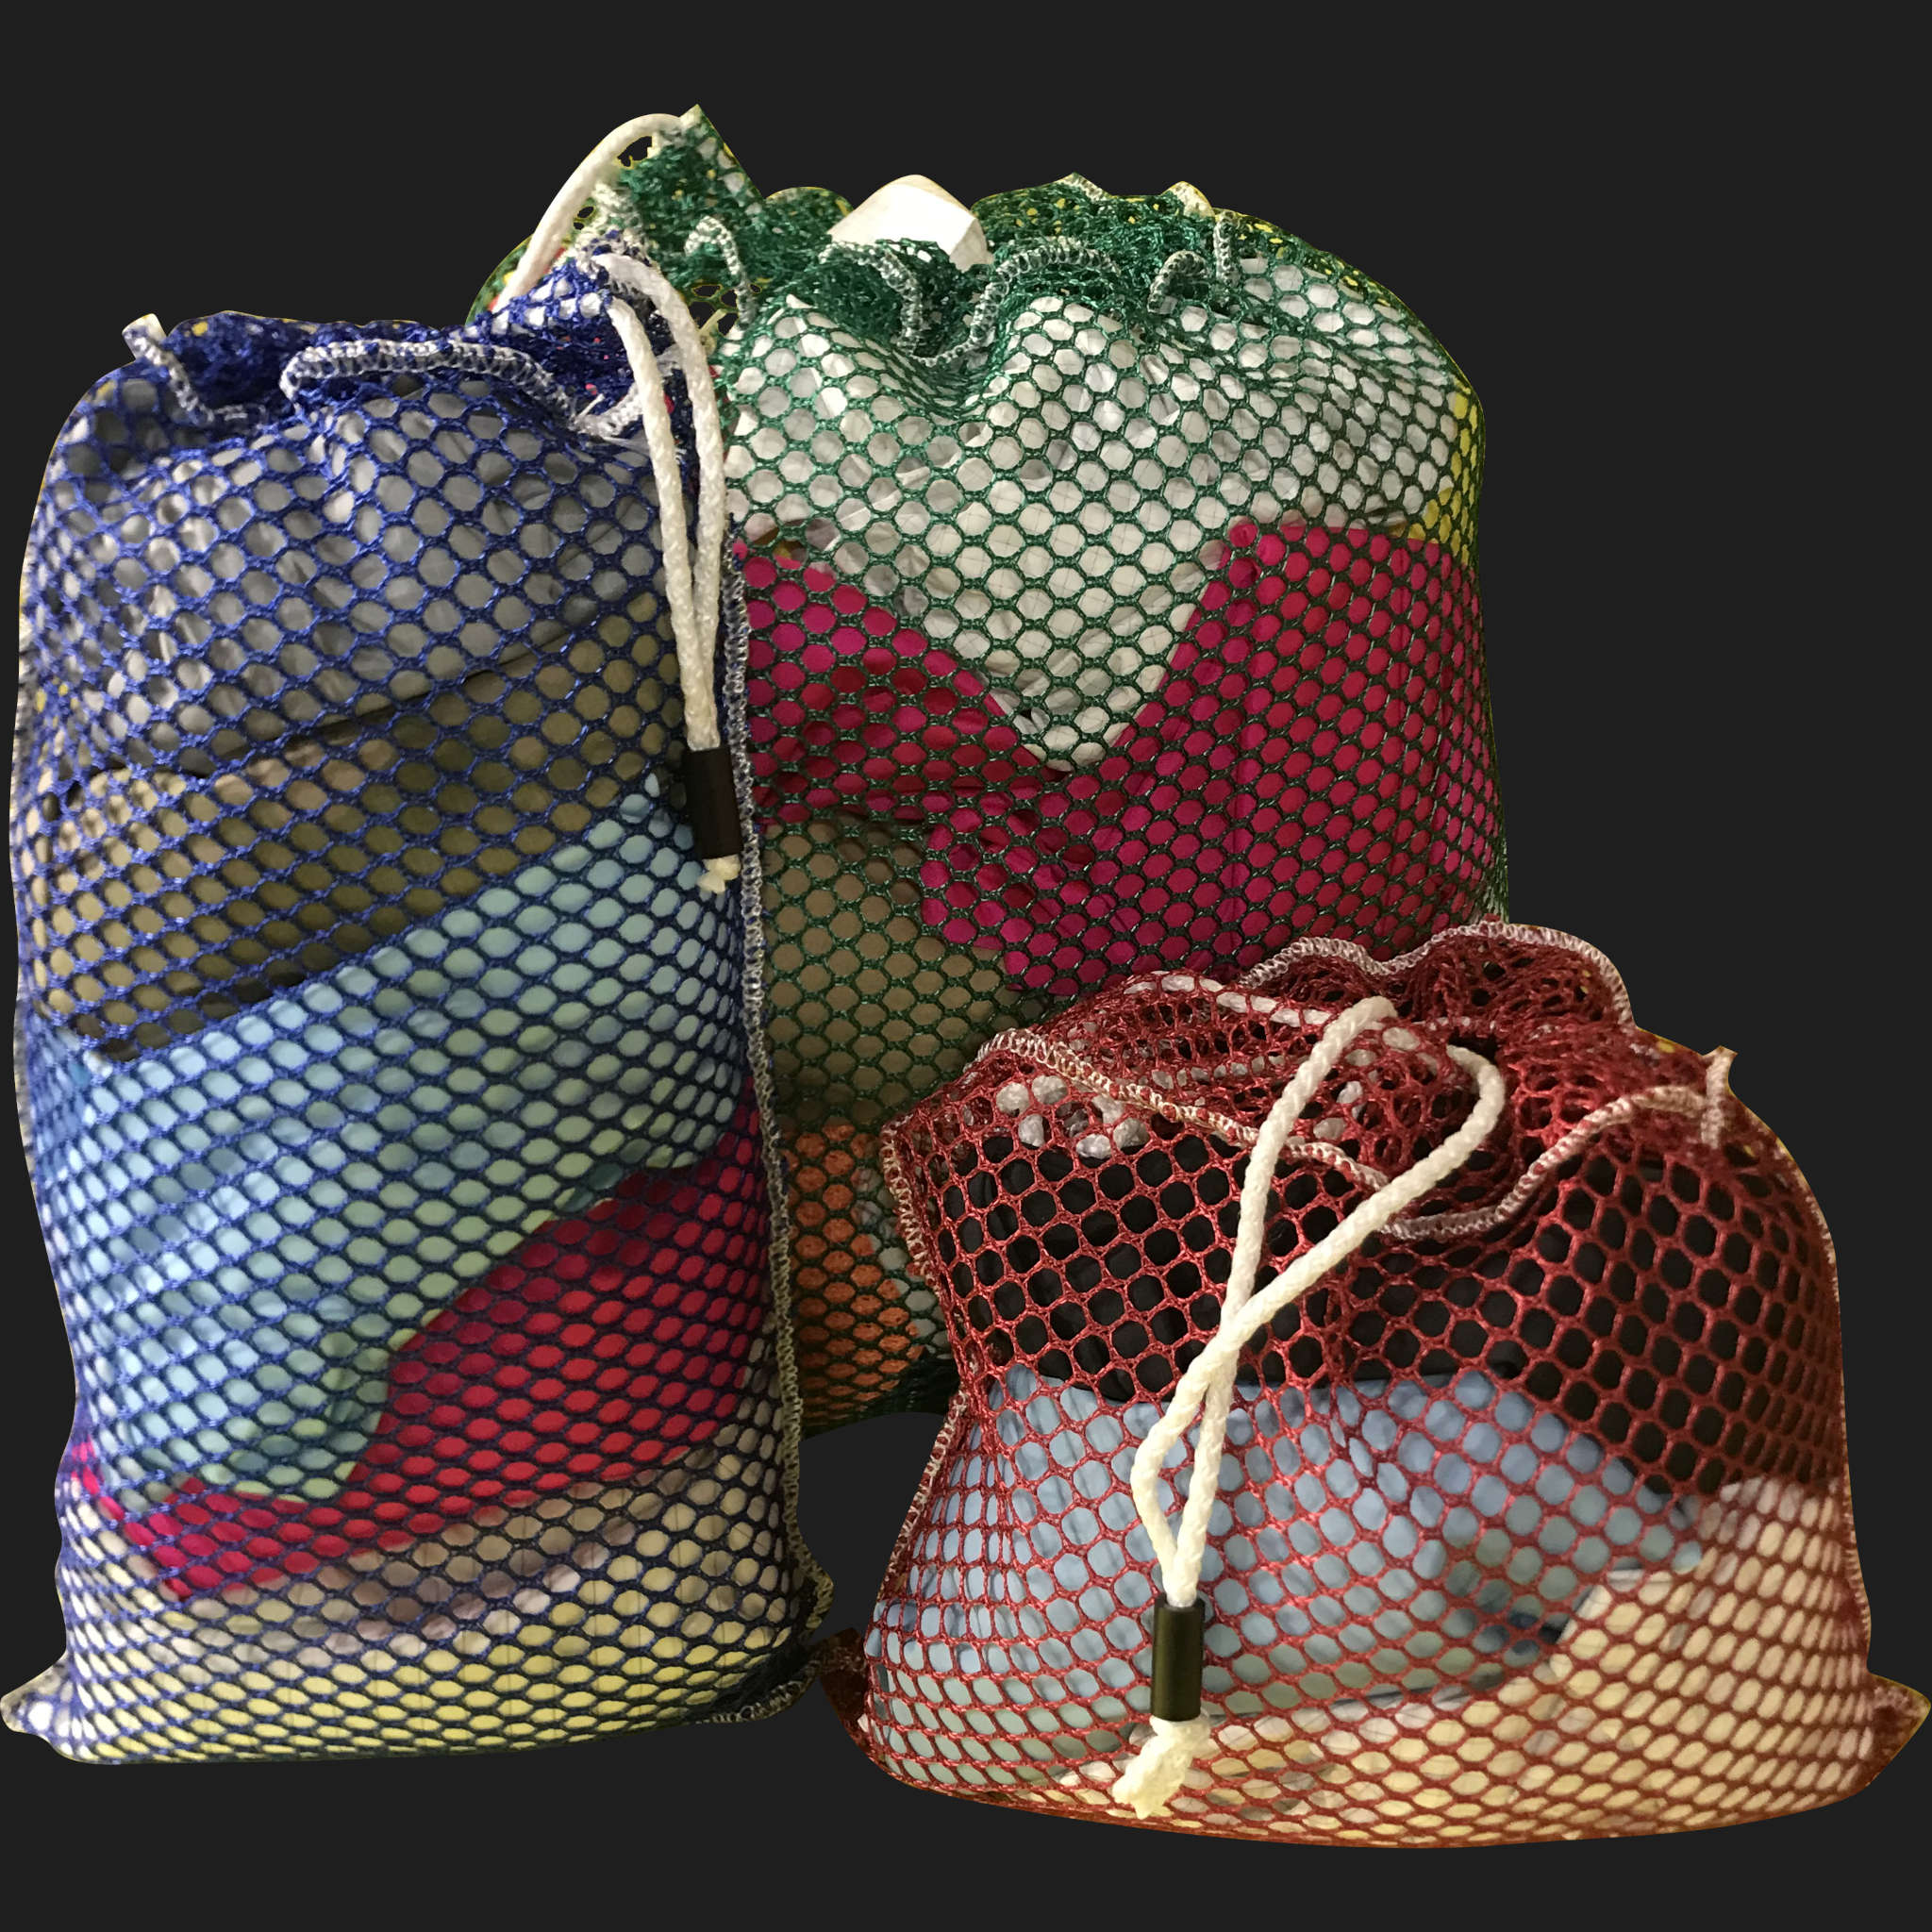 16" x 44" Customized Mesh-Net-Laundry Bags Heavy Duty with Cord and barrellock closure